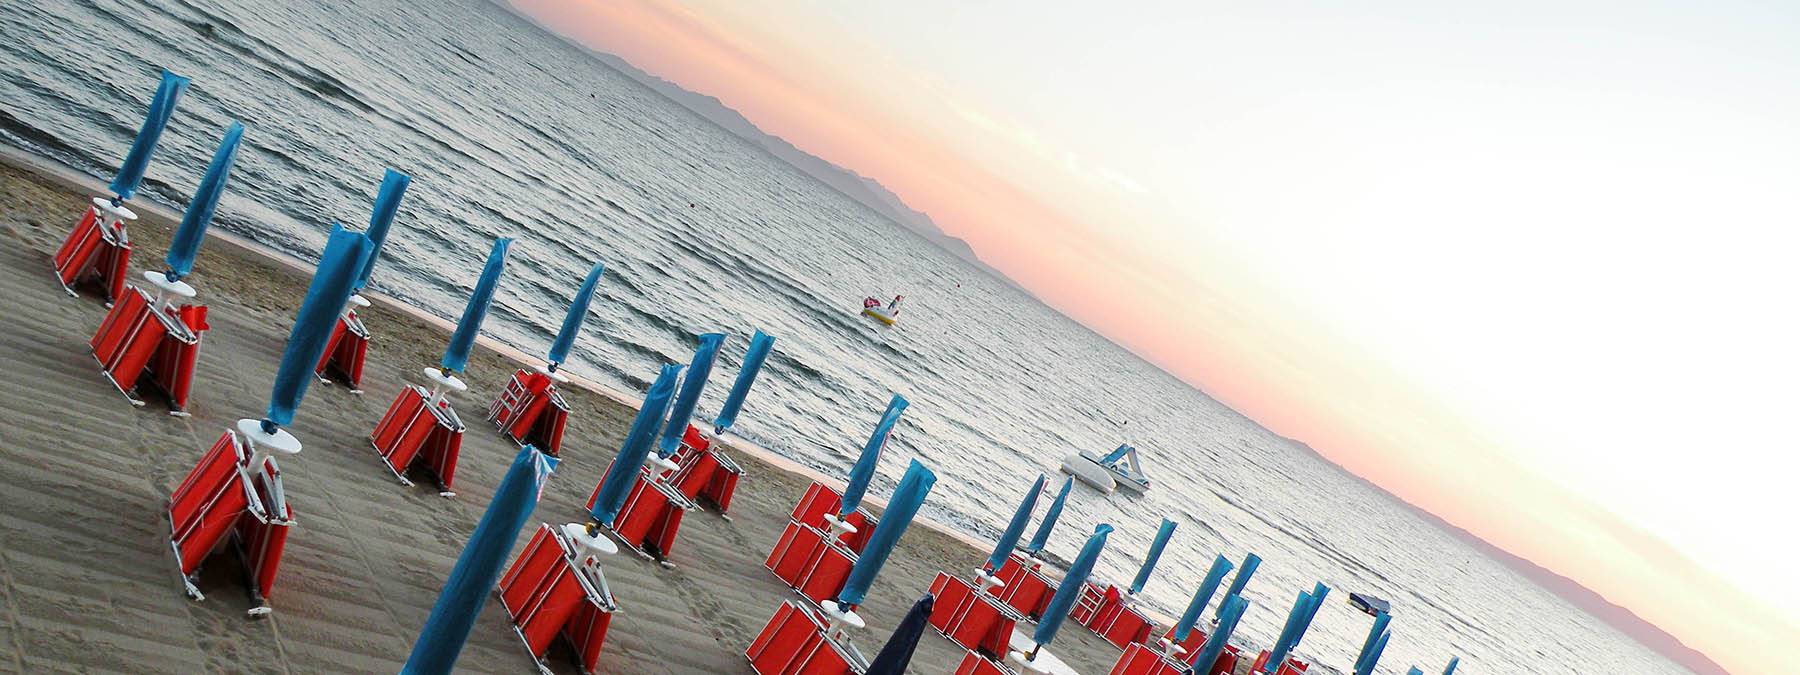 Family holidays in a hotel with restaurant and beach in Tuscany